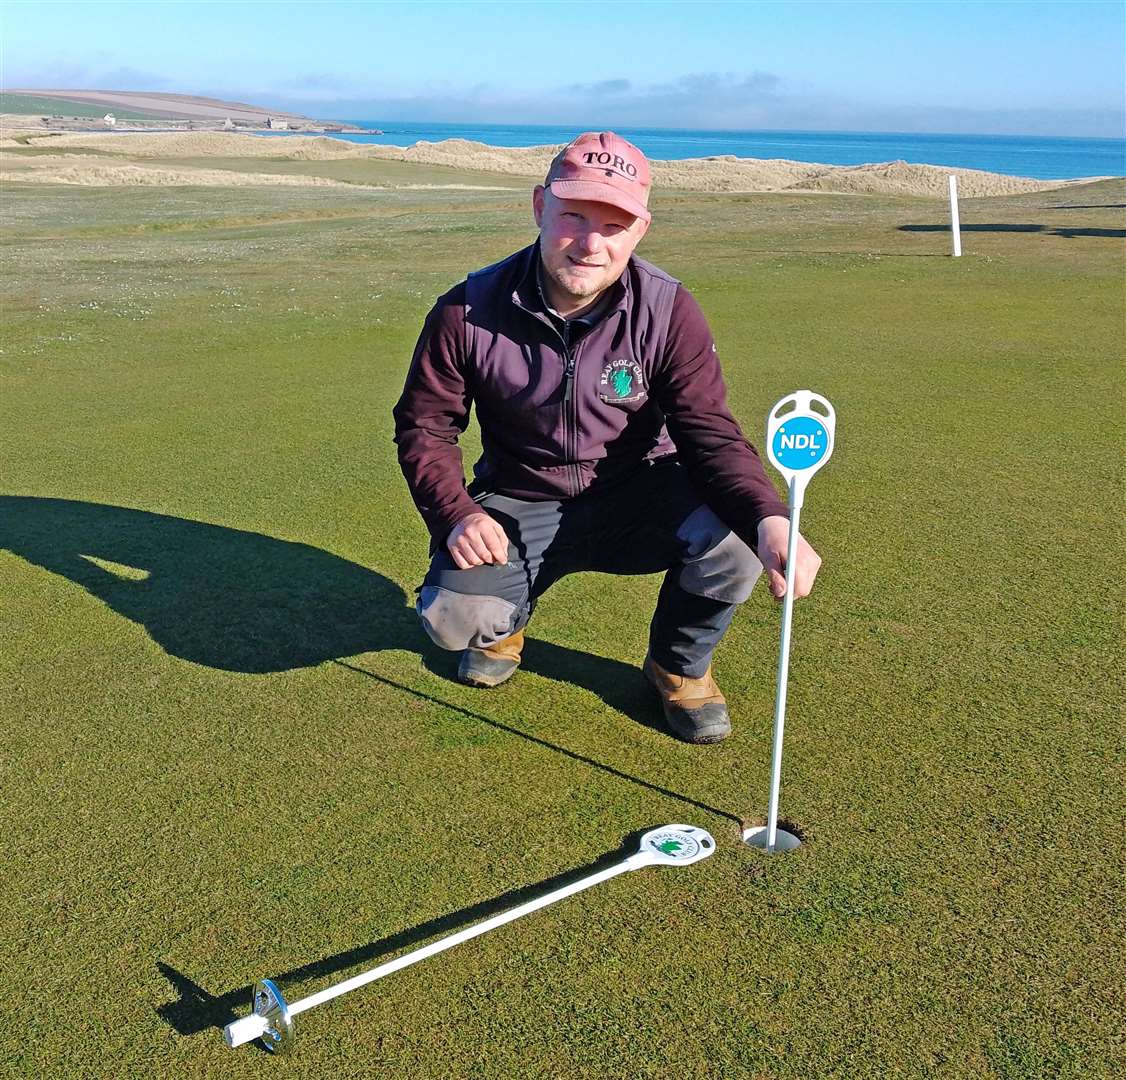 Reay greenkeeper Jason Norwood showing off new pins the club received for the practice putting green thanks to sponsorship from NDL (Nuclear Decommissioning Ltd).